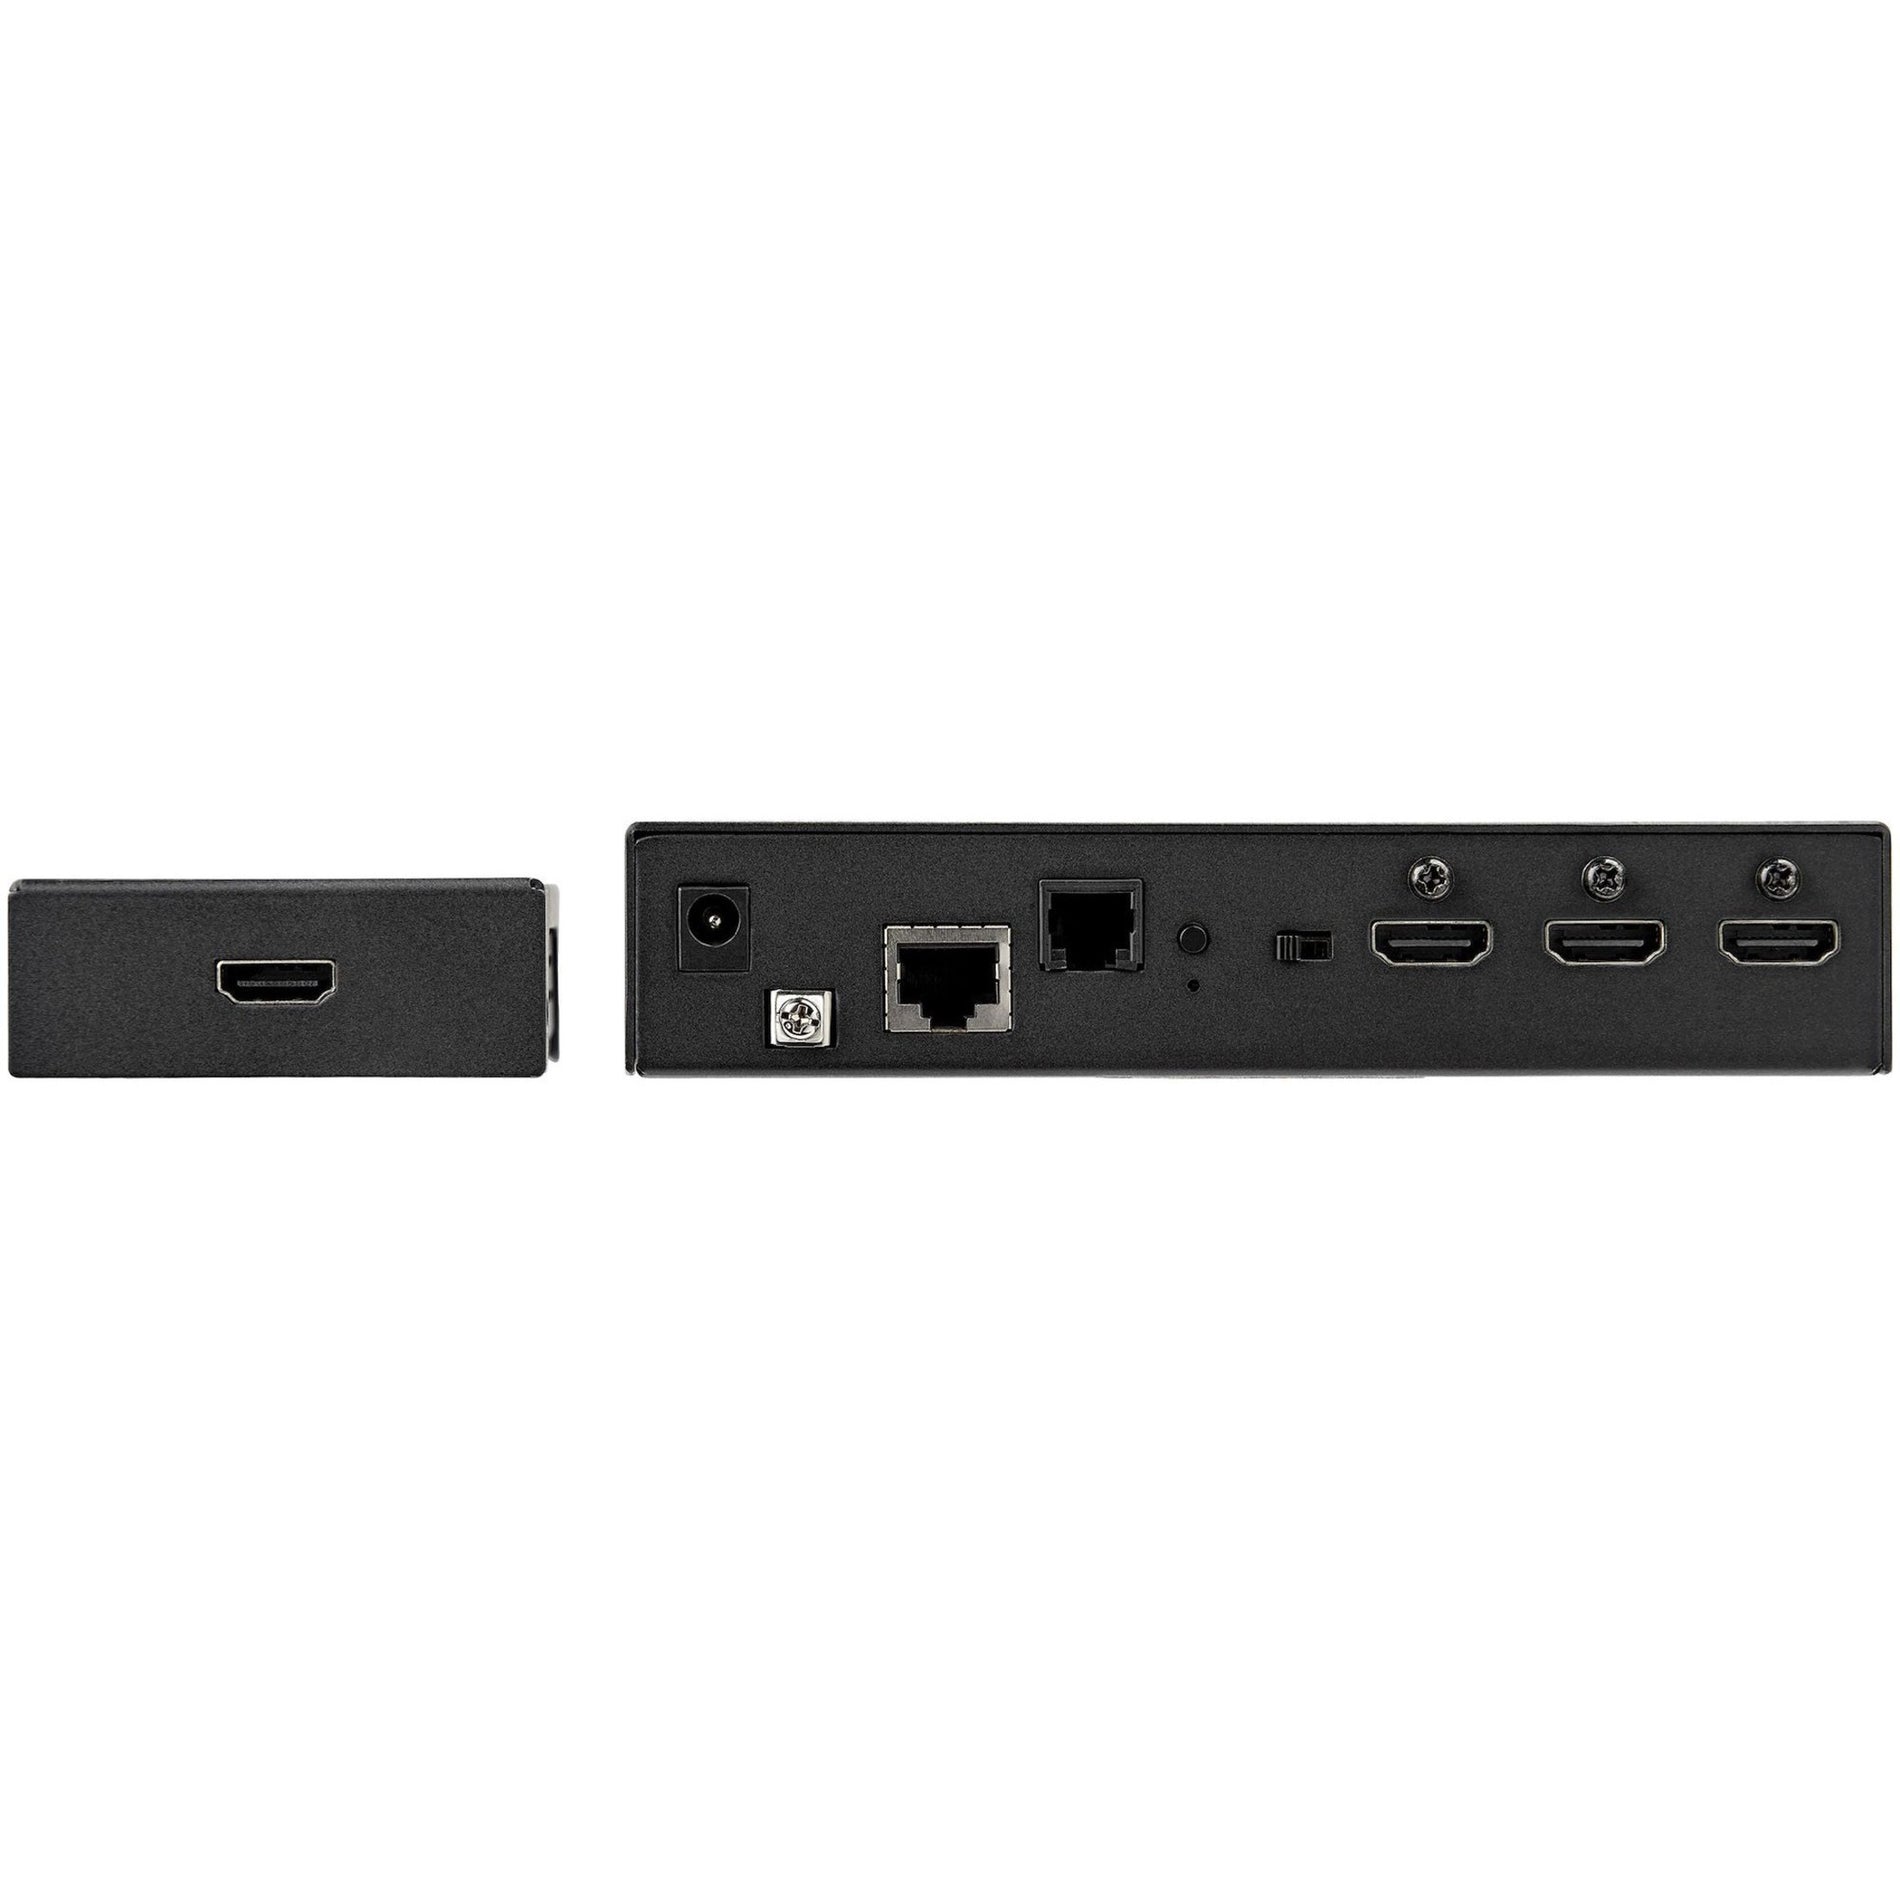 StarTech.com VS321HDBTK HDMI Extender over CAT6/5e with 3 Port Video Switch, 4K HDMI Switch Box, Video over HDBaseT with Auto Switcher